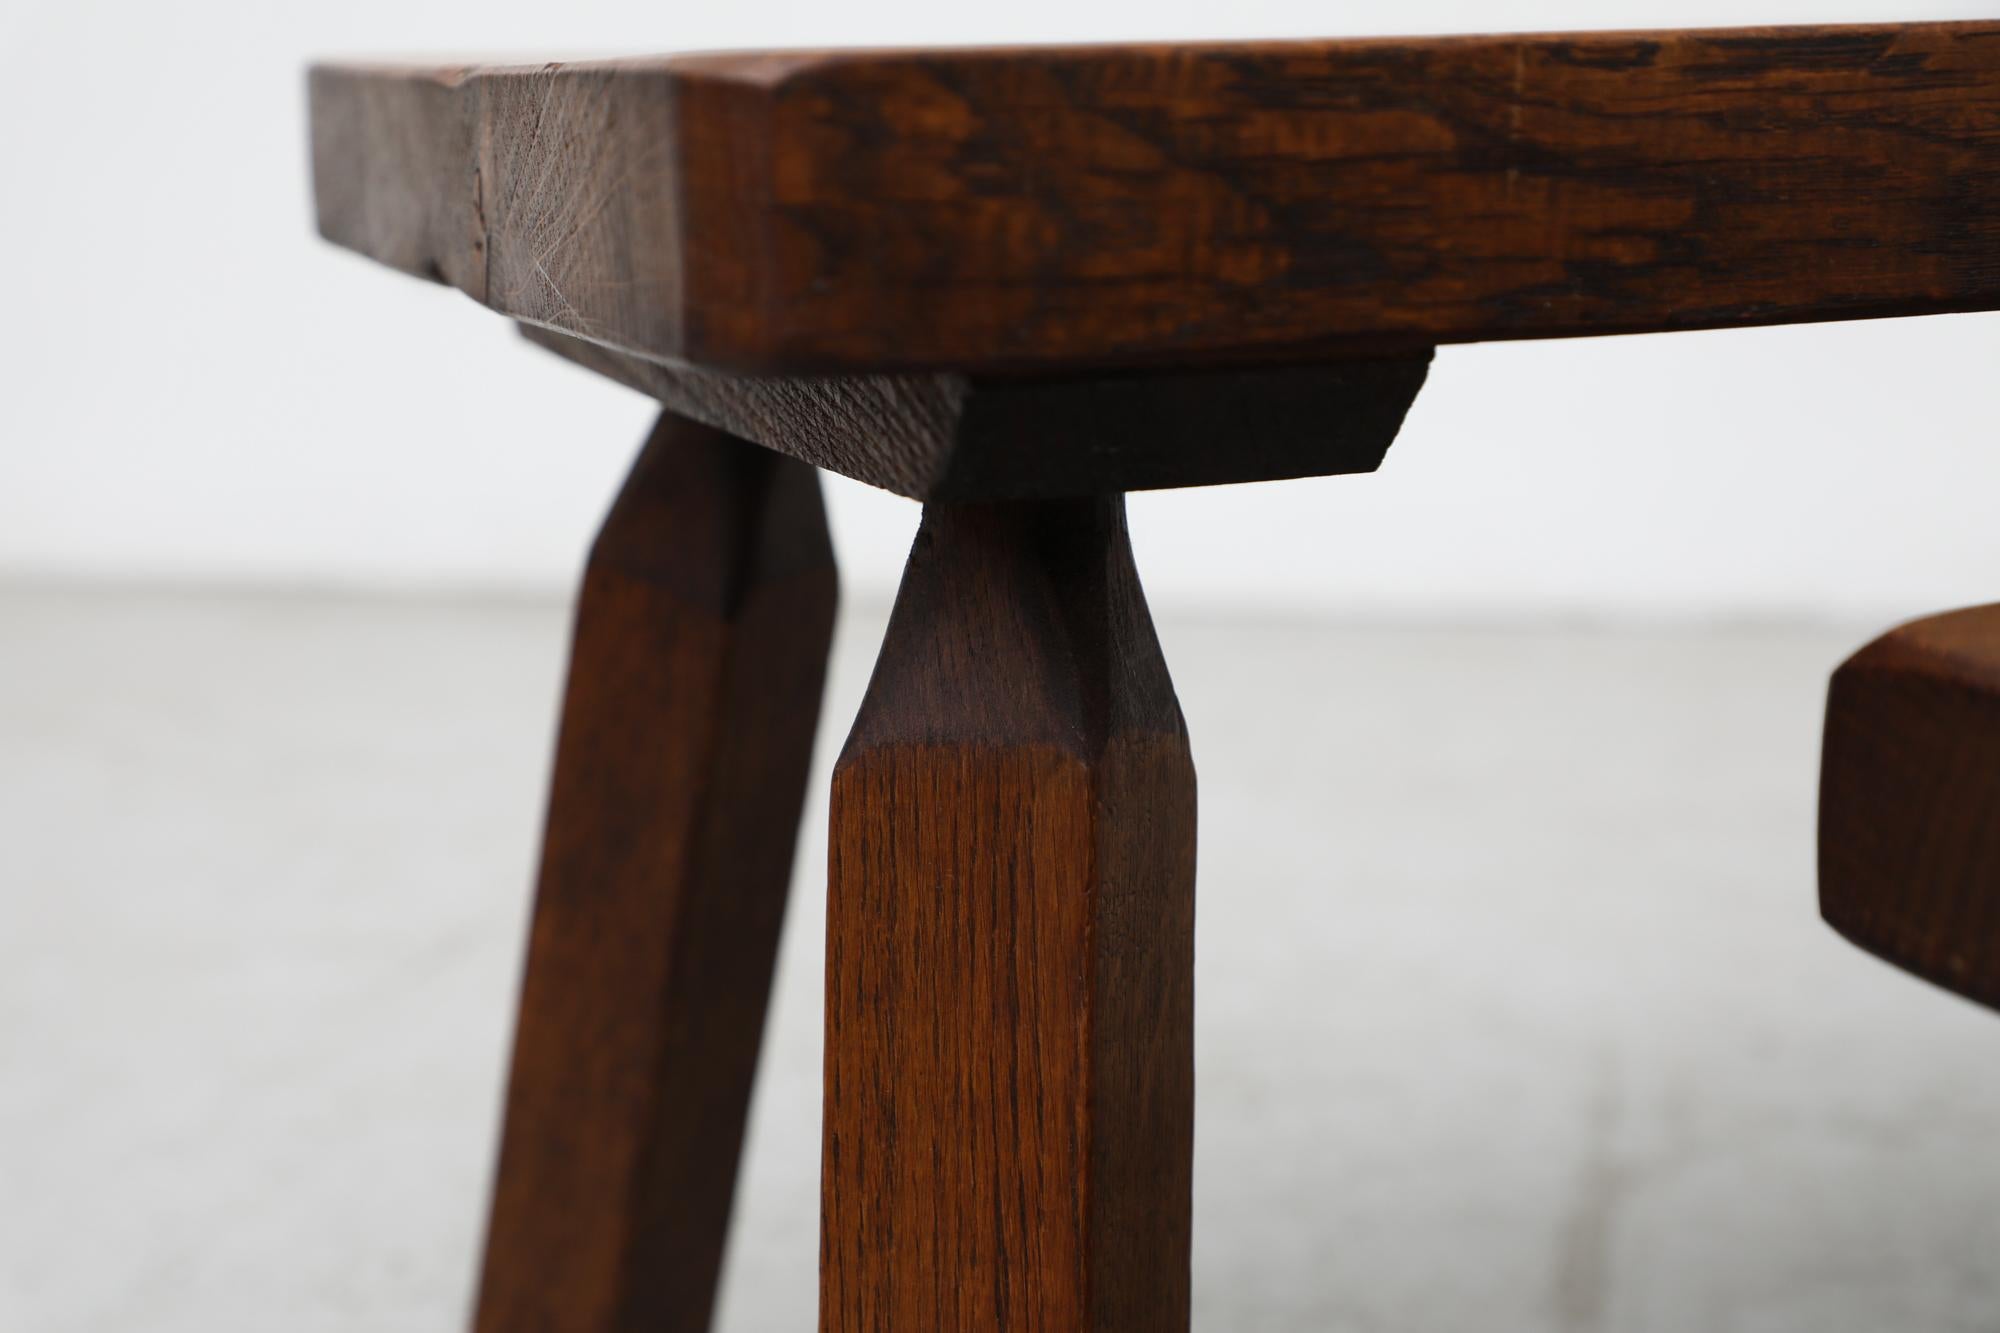 Pierre Chapo Inspired Brutalist Nesting Tables with Short Legs 5